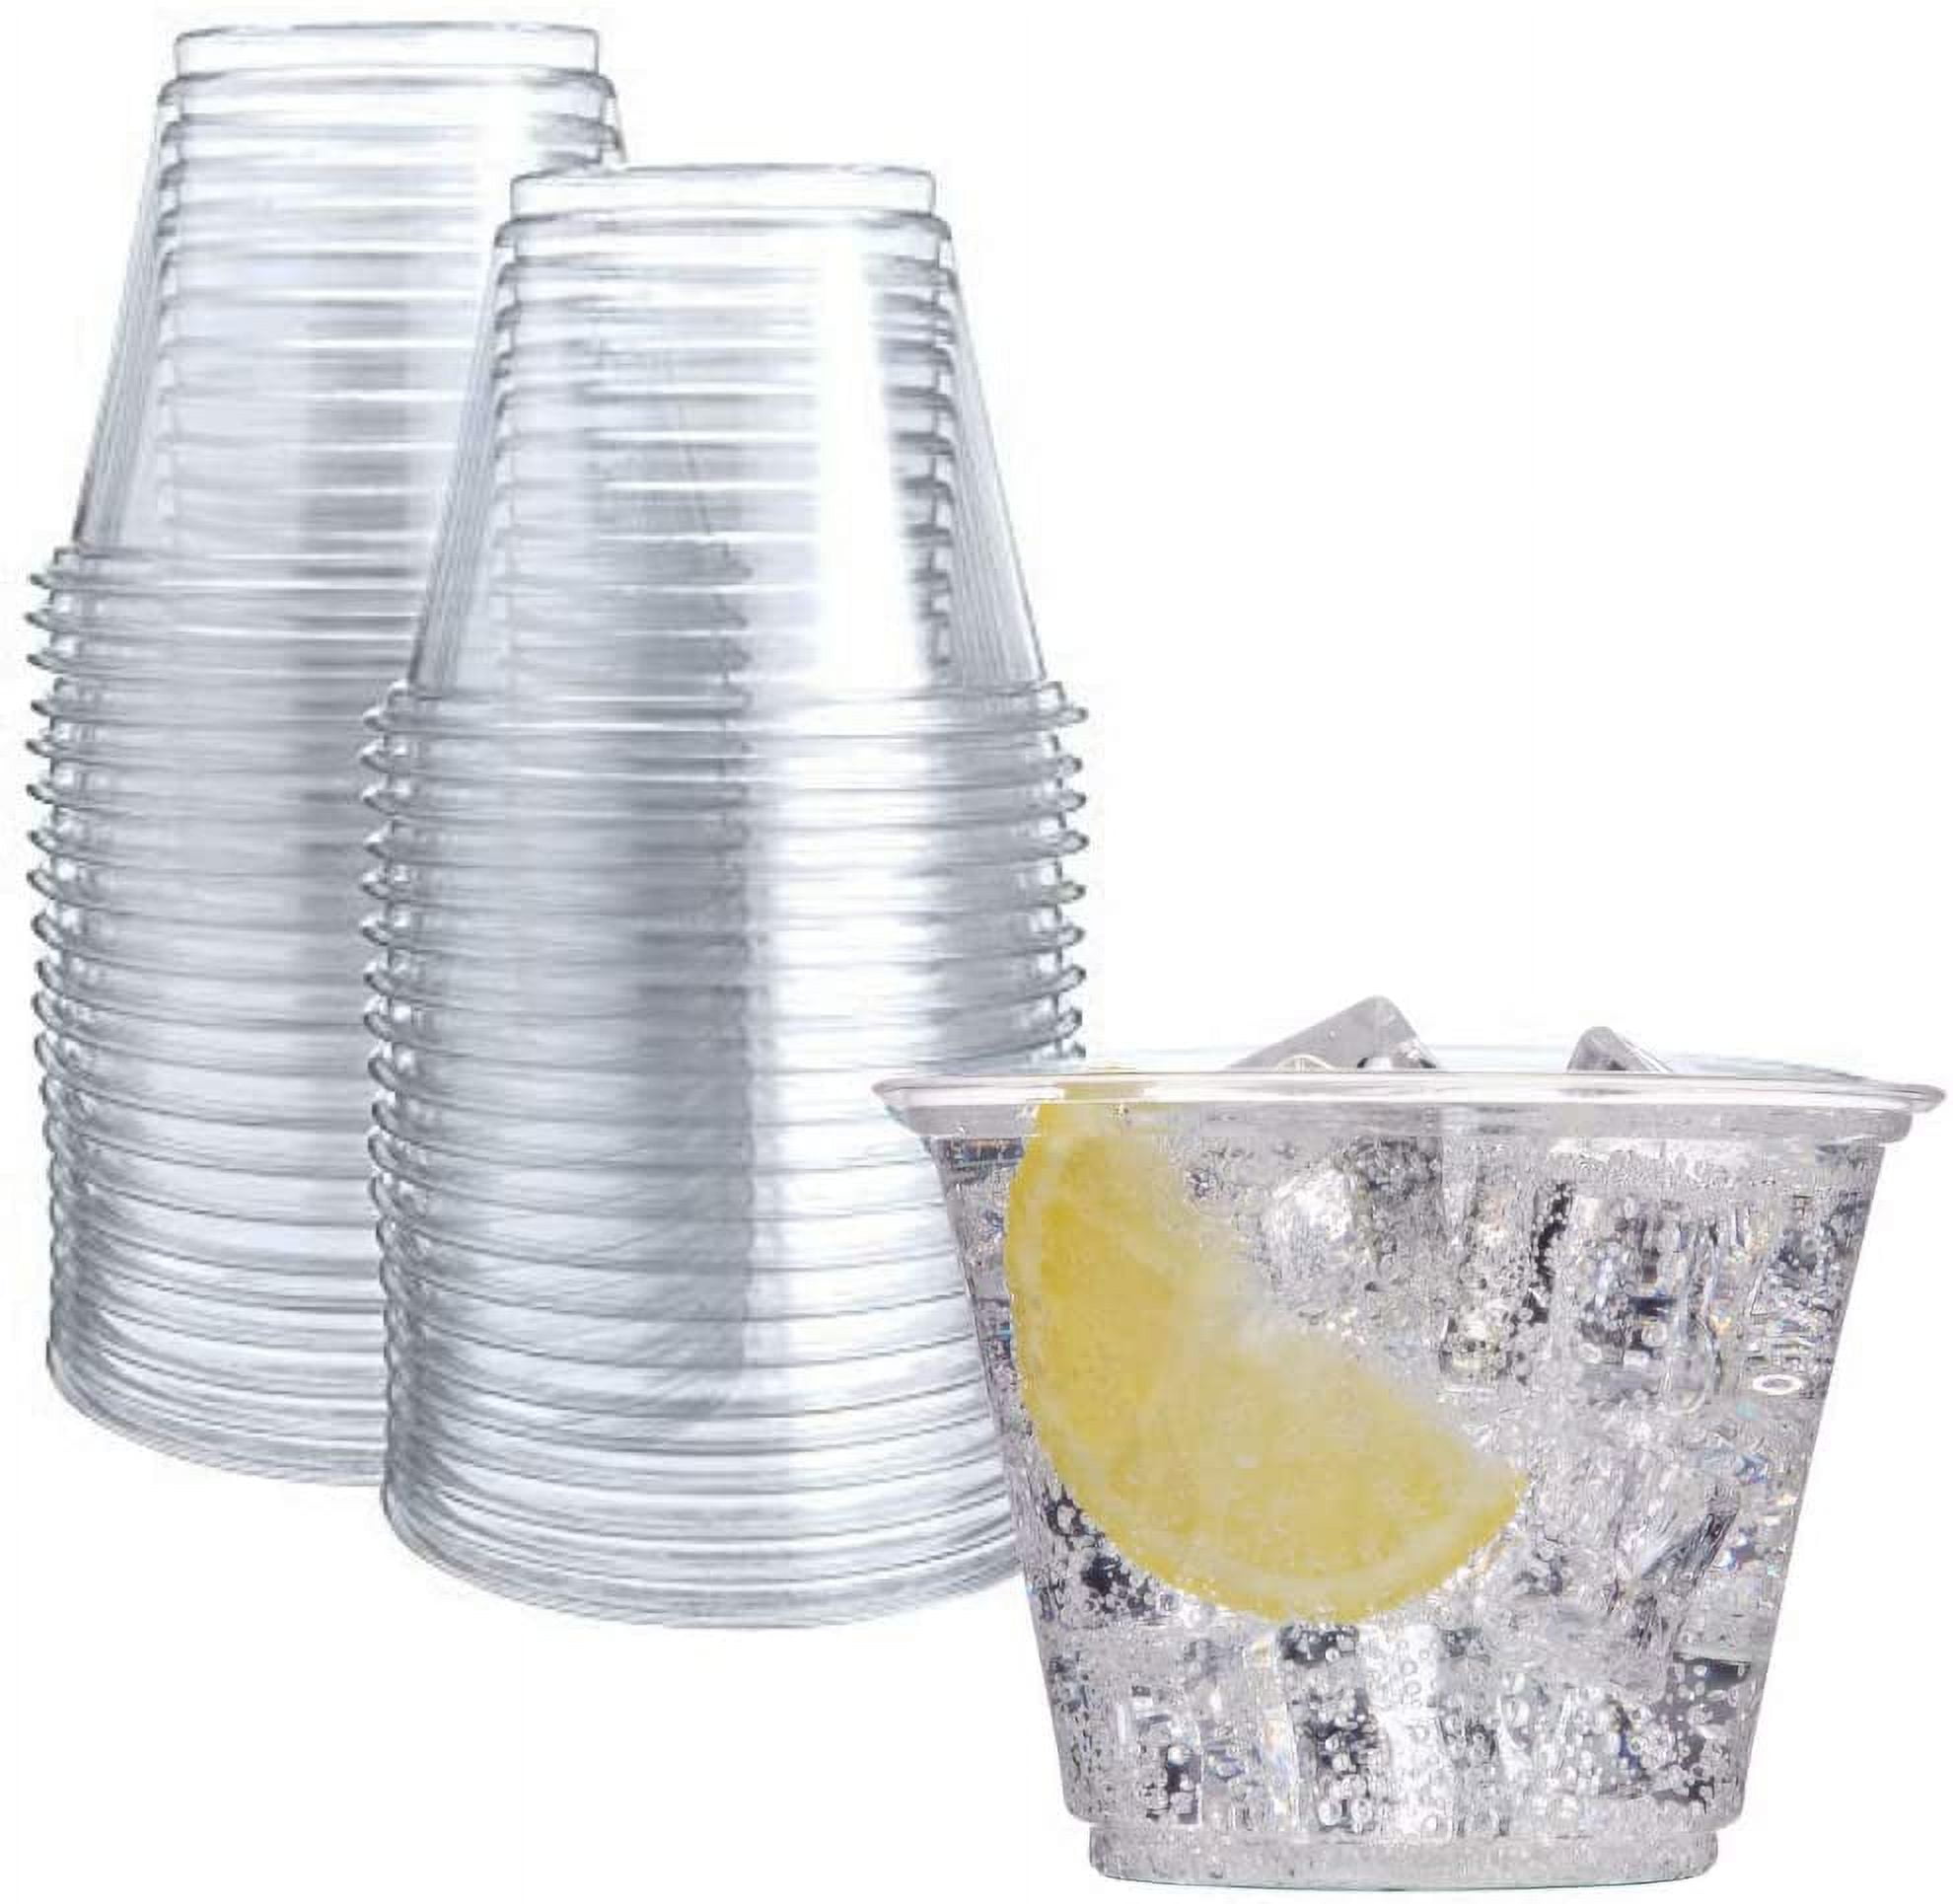 Dixie Clear Plastic Pete Cups, 9 Oz, Squat, 50/sleeve, 20 Sleeves/carton -  Mfr# CPET9